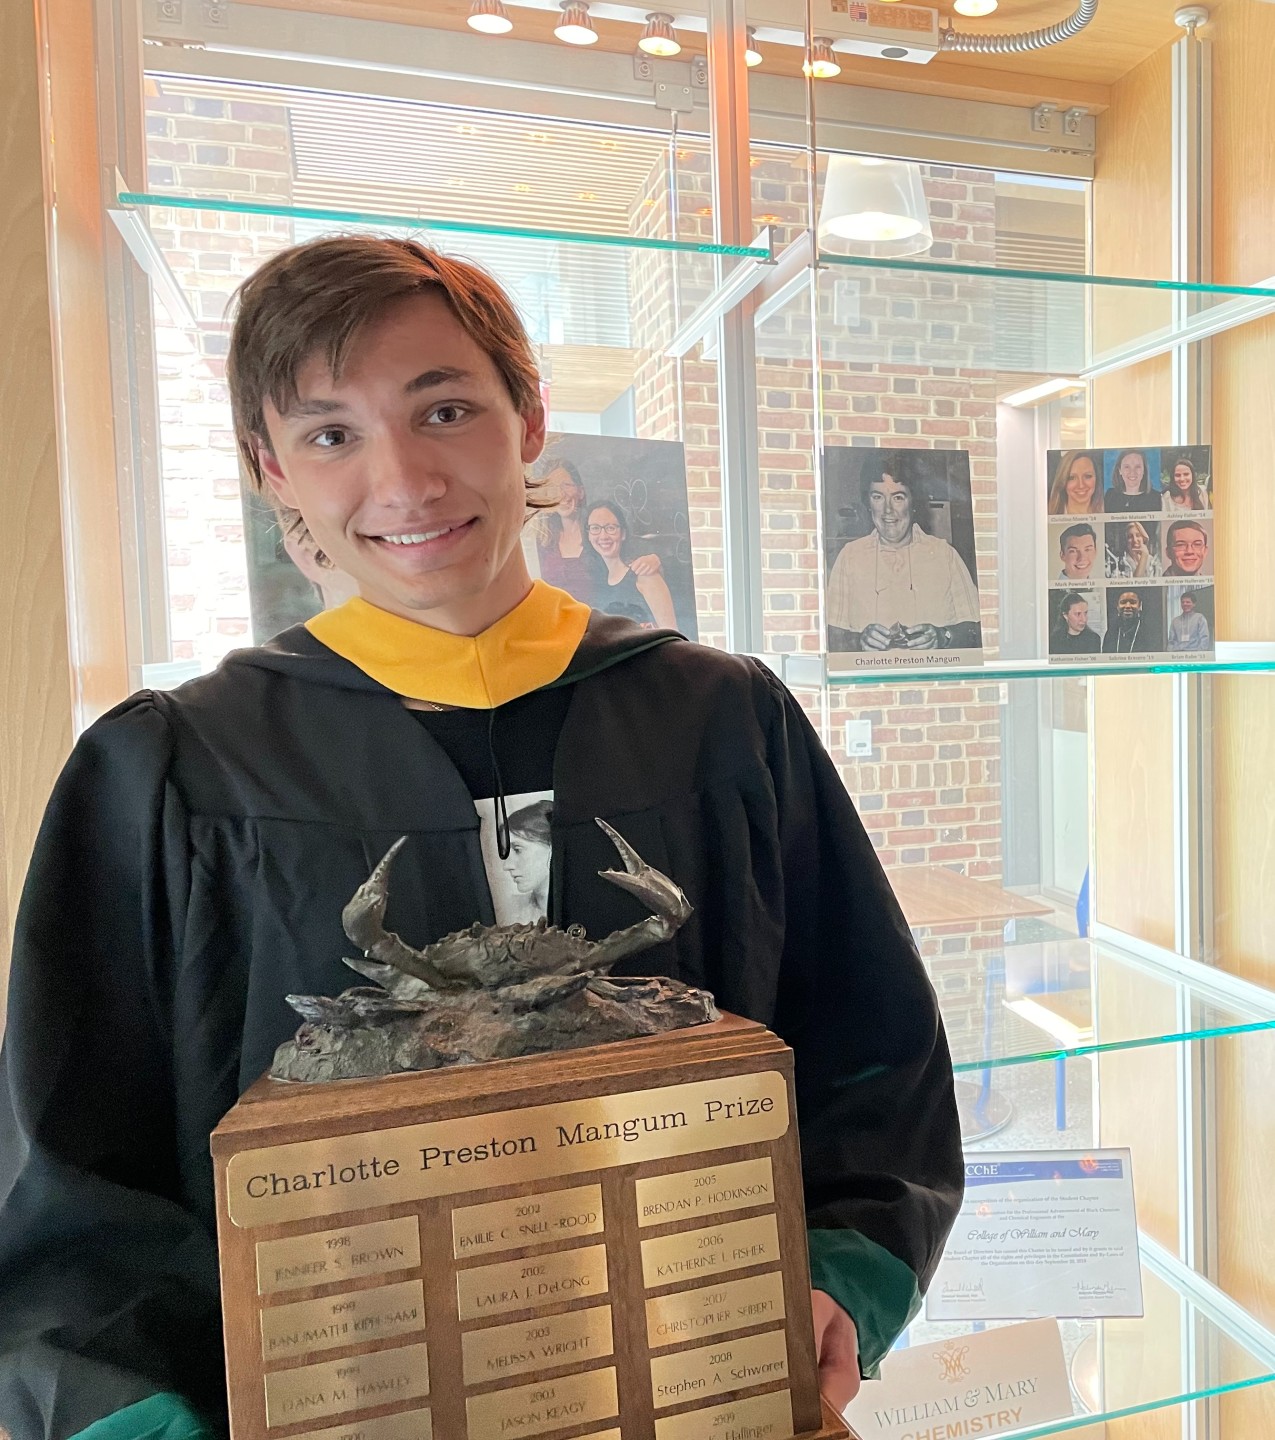 Augustin Kalytiak-Davis ’22 poses in front of the display case where his name has been added to the list of winners on the Charlotte Preston Mangum Prize